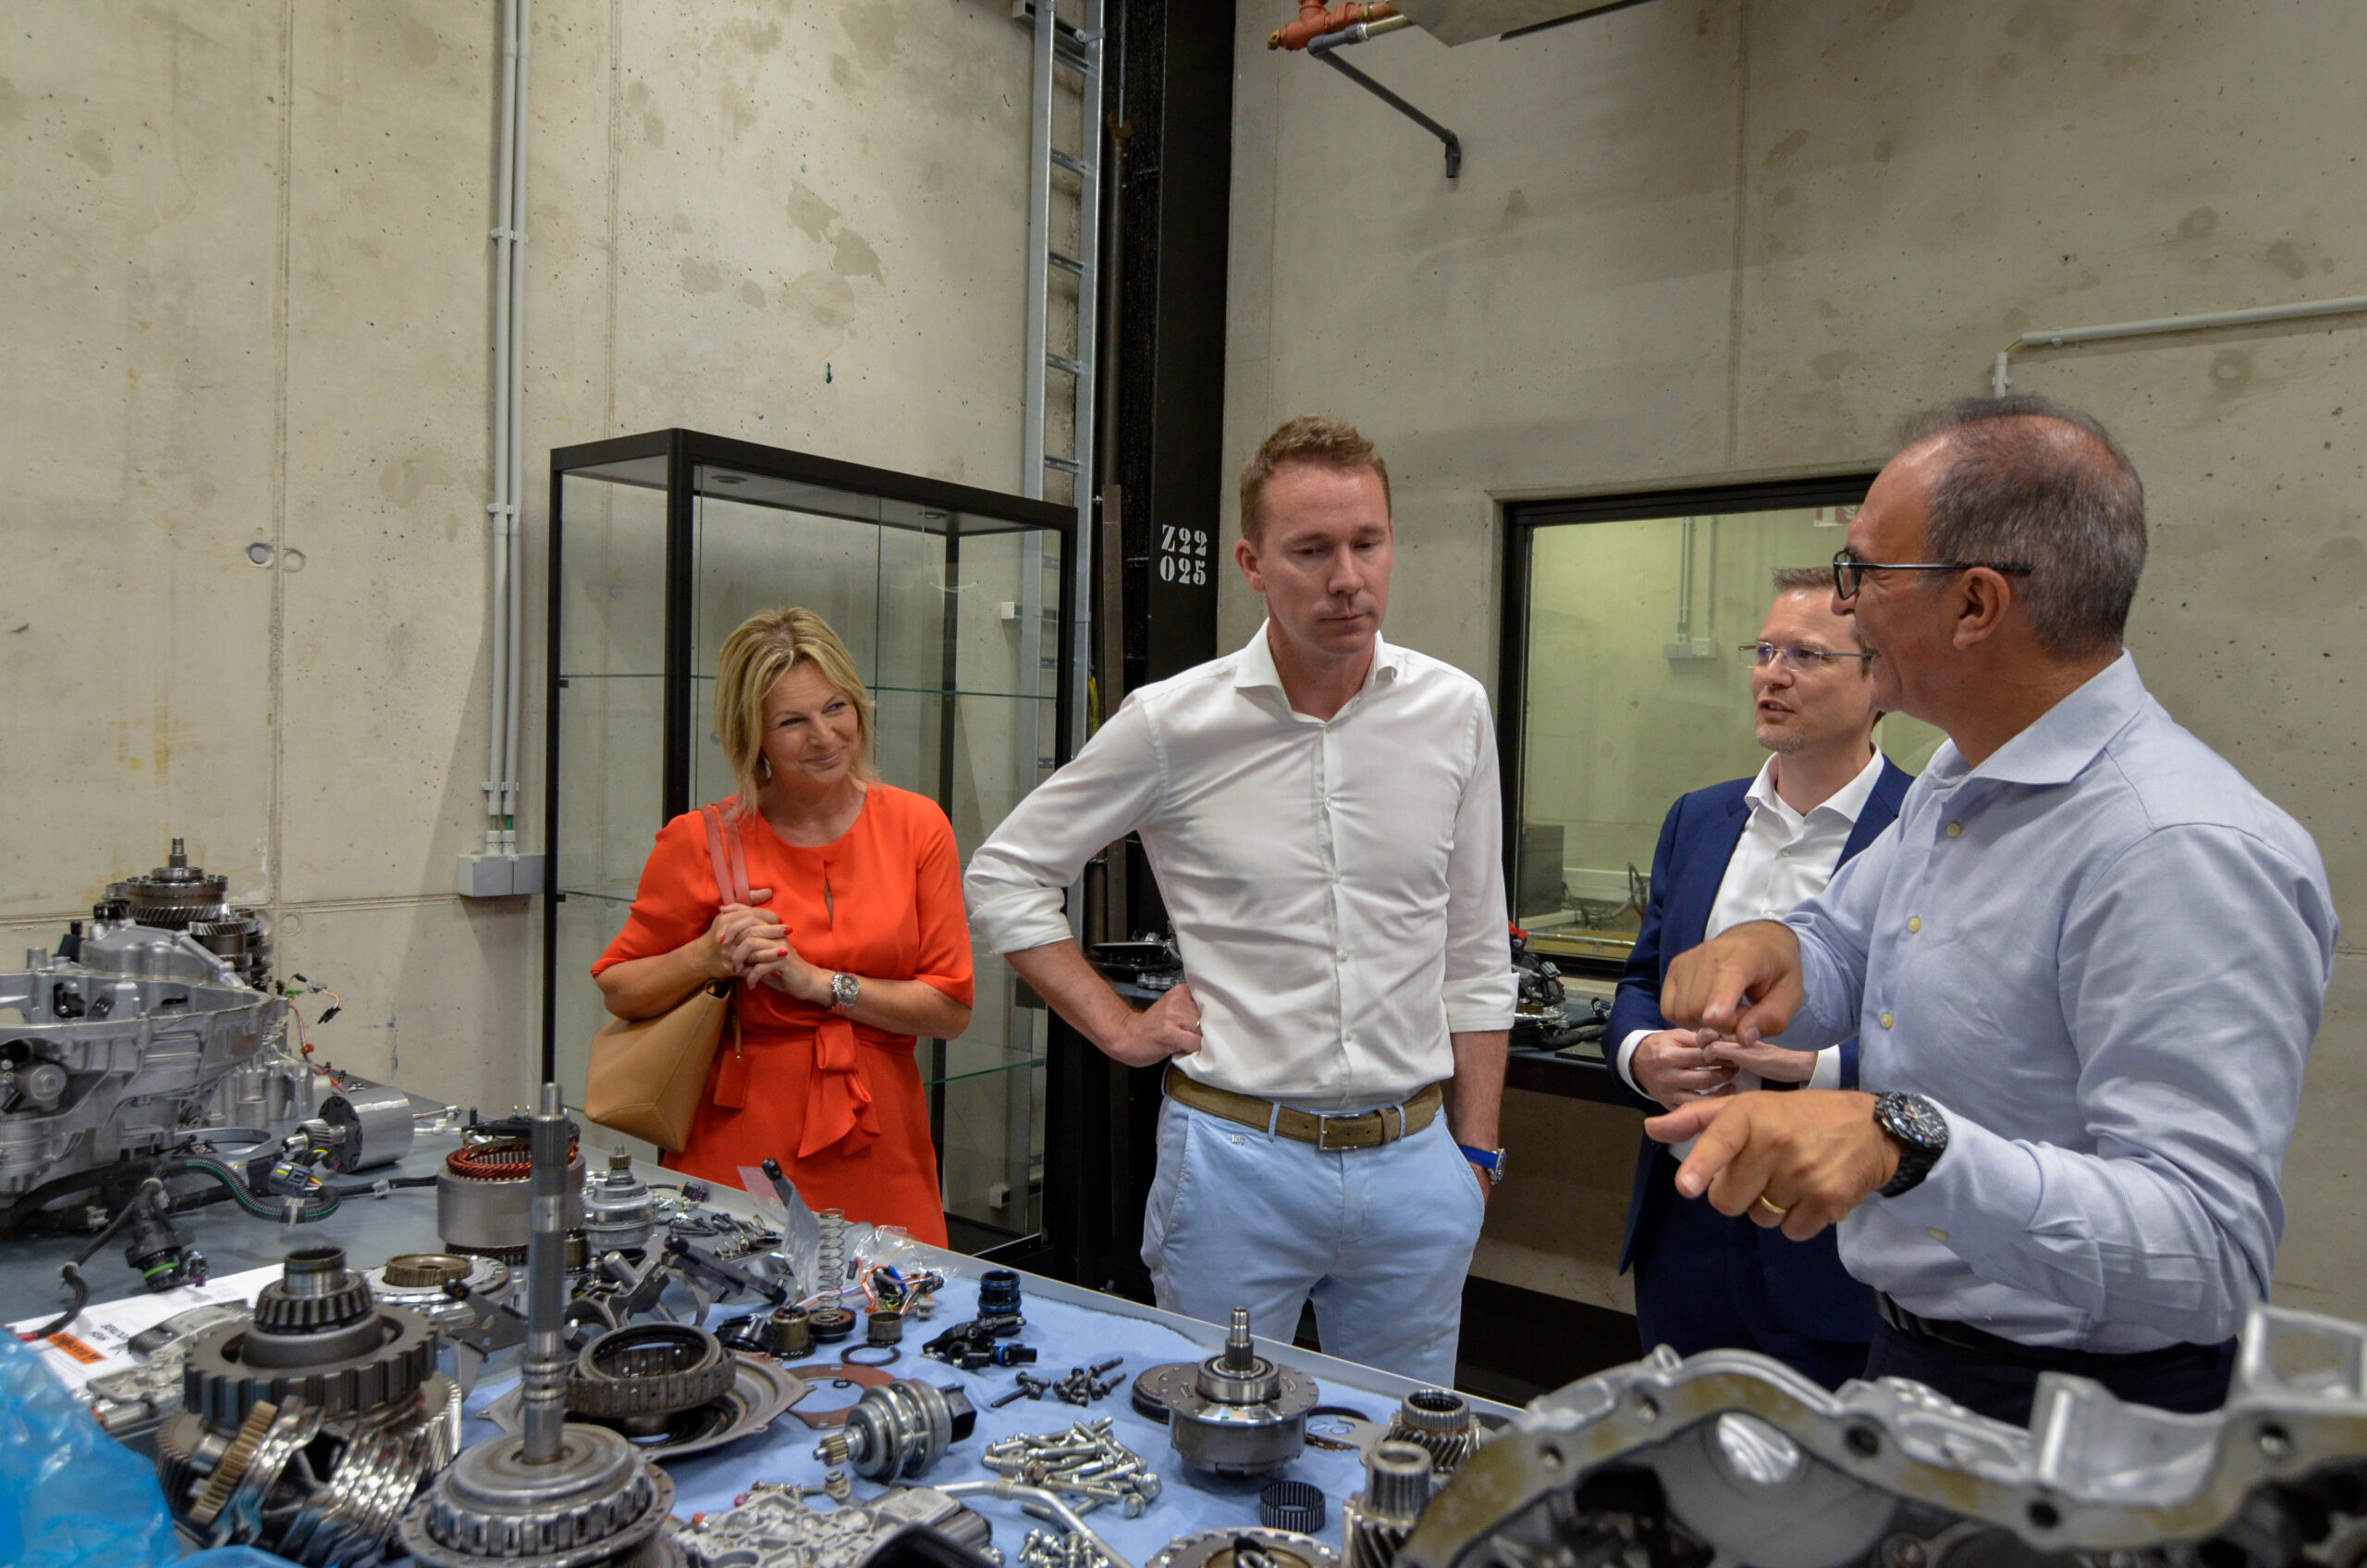 Minister of innovation and mayor visit Punch Powertrain: Dialogue on boosting Flanders’ innovation power